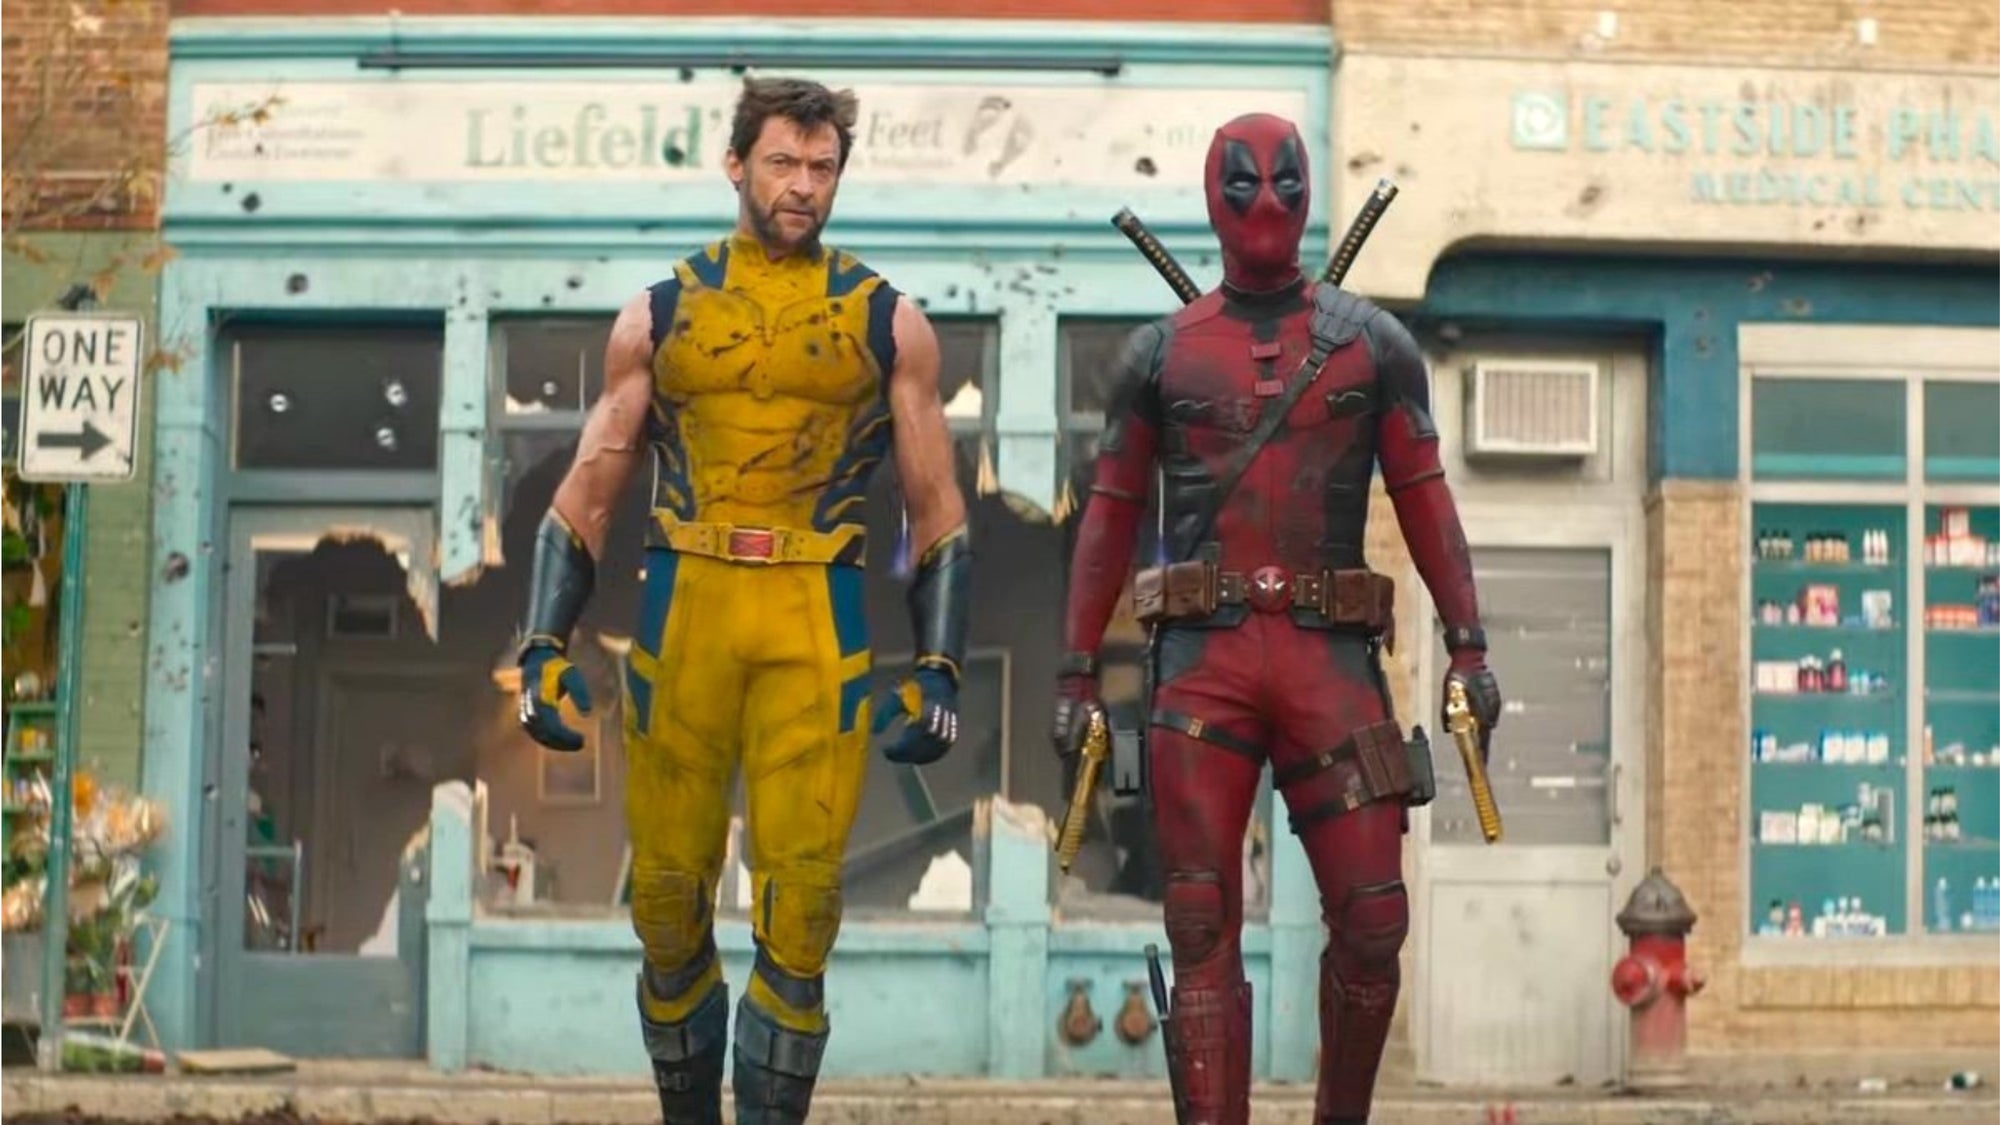 Wolverine: Lost in the Multiverse? Deadpool & Wolverine Trailer Hints at a World Gone Wrong